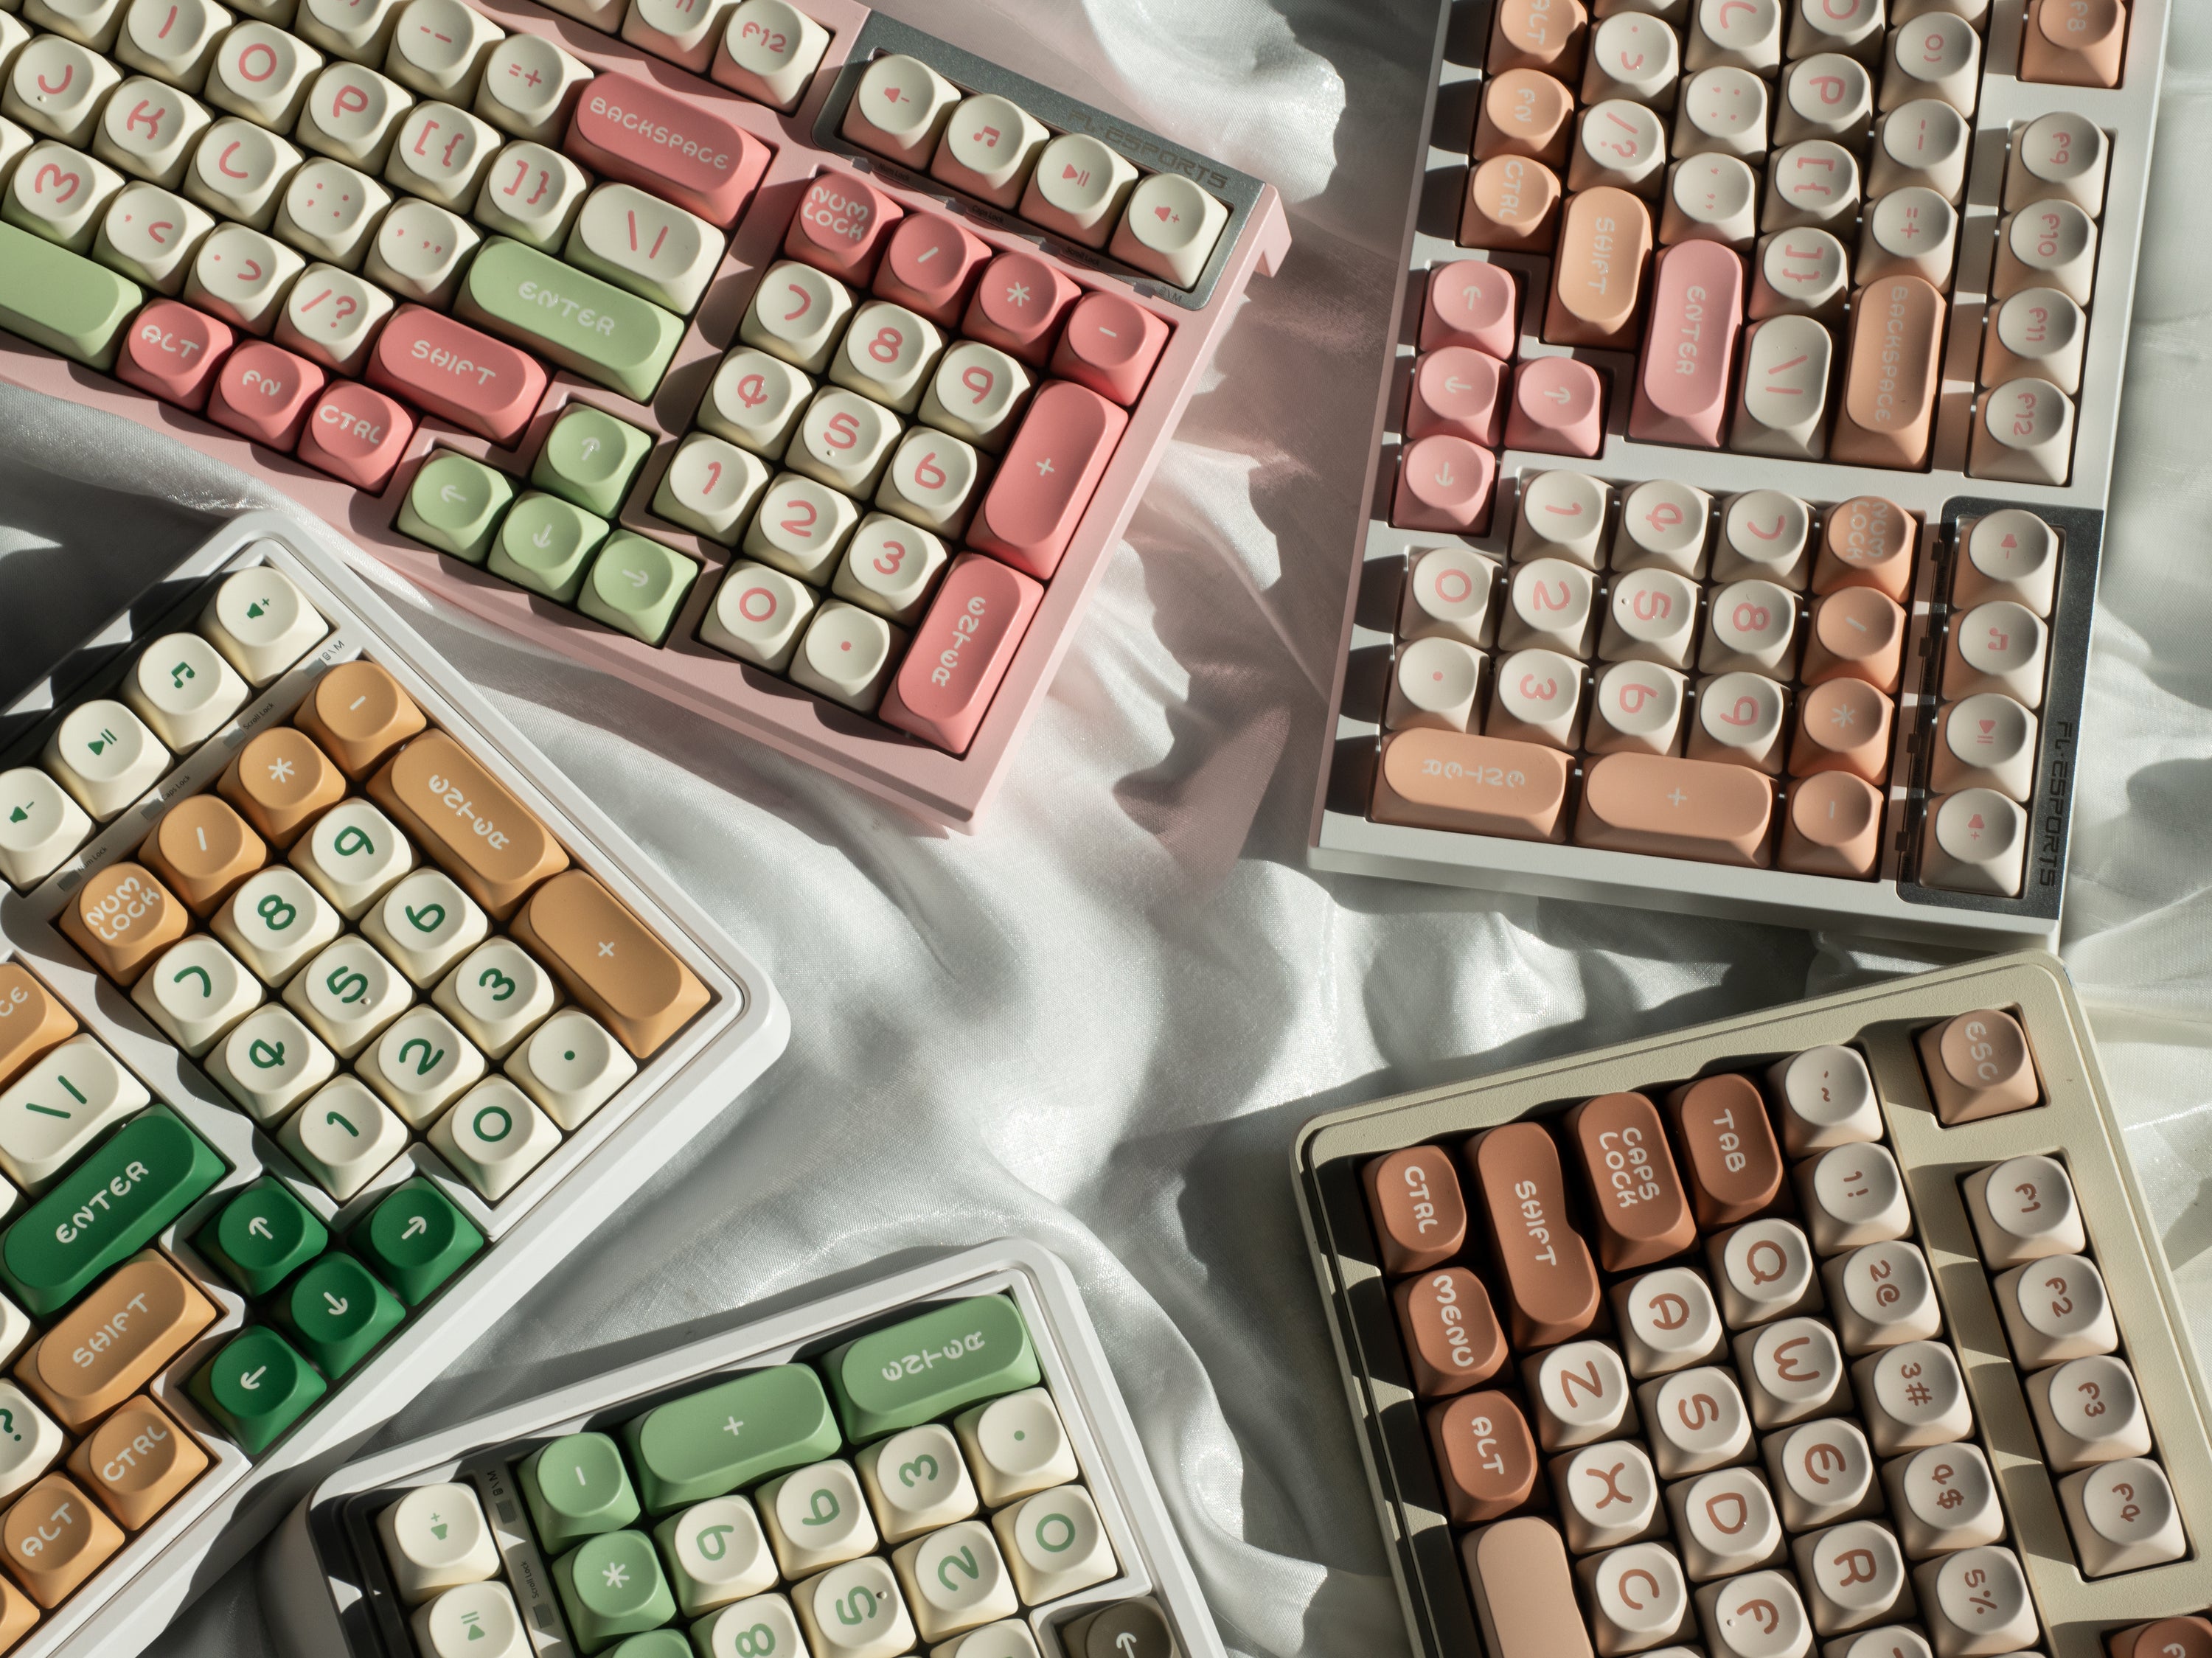 Colorful creativity: the charm of beige and pink clashing two-color injection molded keycaps